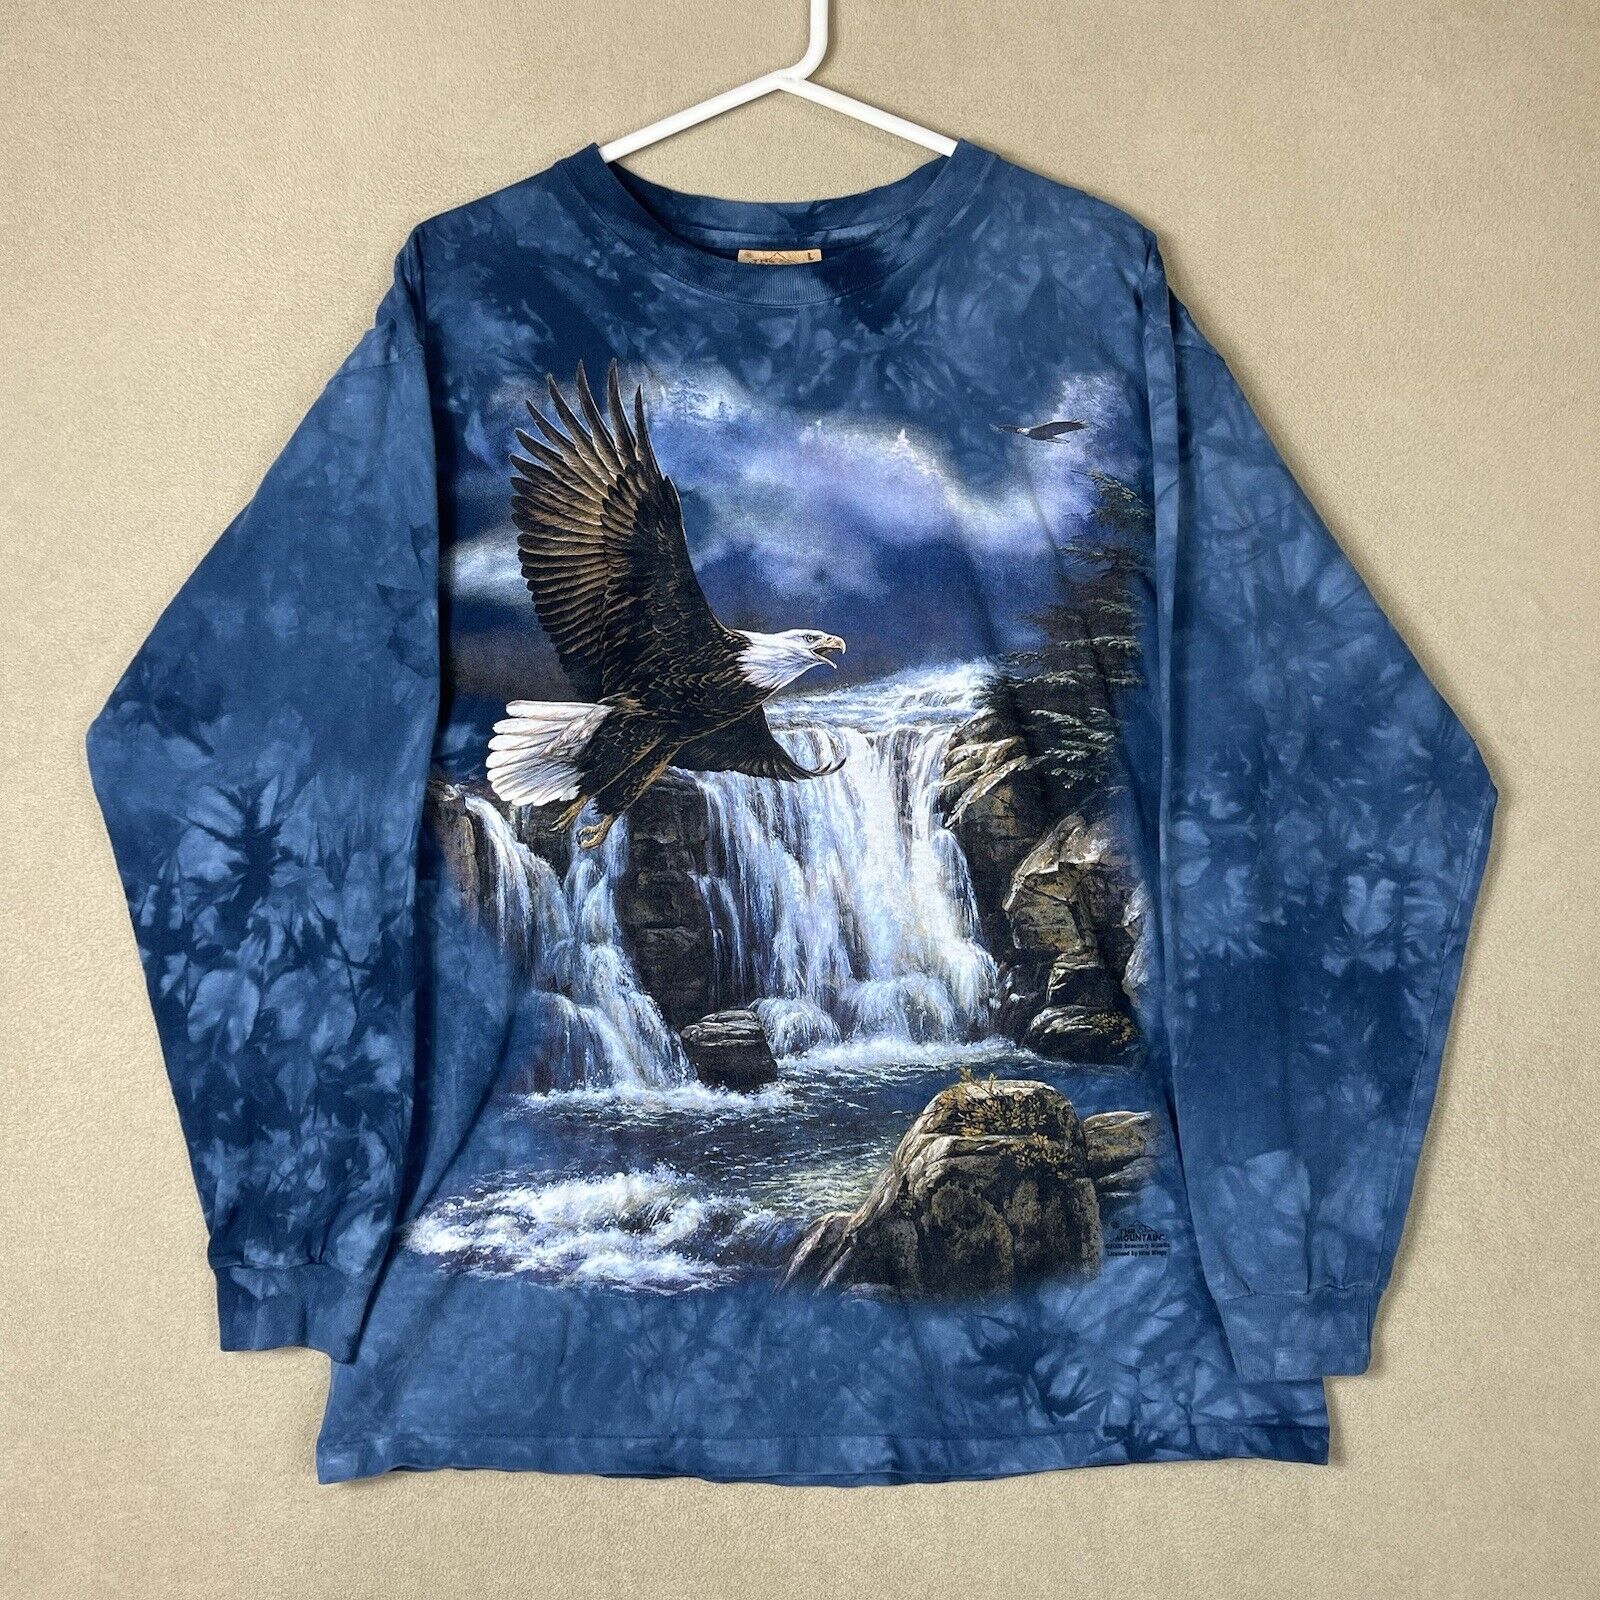 The Mountain Shirt Mens Large Blue Eagle Waterfall Long Sleeve T-Shirt Tee Adult